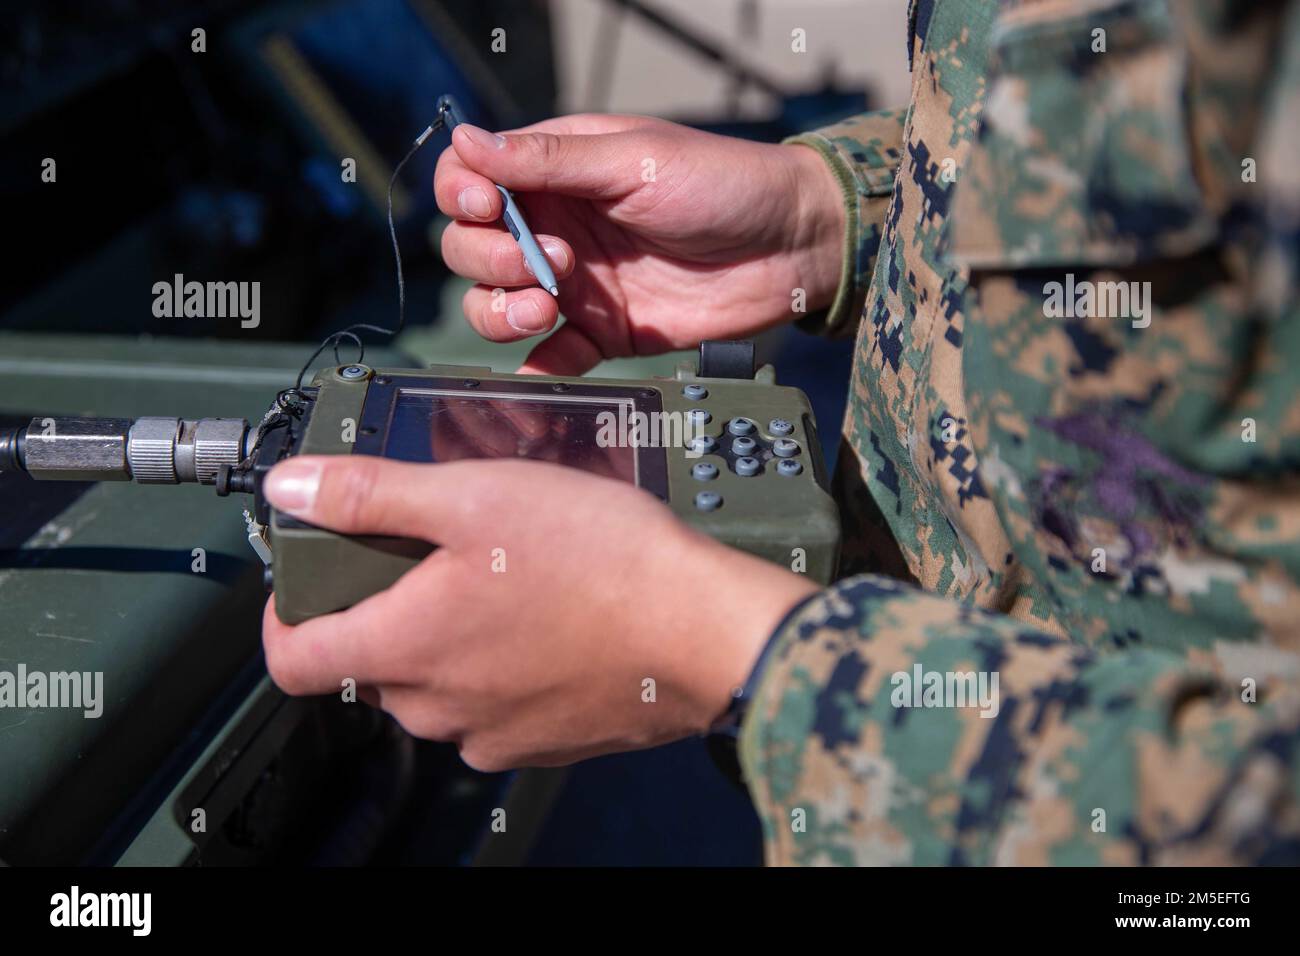 U.S. Marine Corps Lance Cpl. Marvin Diaz, a satellite communications operator with 9th Communication Battalion, I Marine Expeditionary Force Information Group, loads crypto on the PYQ-10 Simple Key Loader at Marine Corps Base Camp Pendleton, California, March 11, 2022. This training allows the 9th Communication Battalion to be capable of operating, defending, and preserving information networks to enable command and control for the commander in all domains, and support and conduct Marine Air Ground Task Force operations in the information environment. Stock Photo